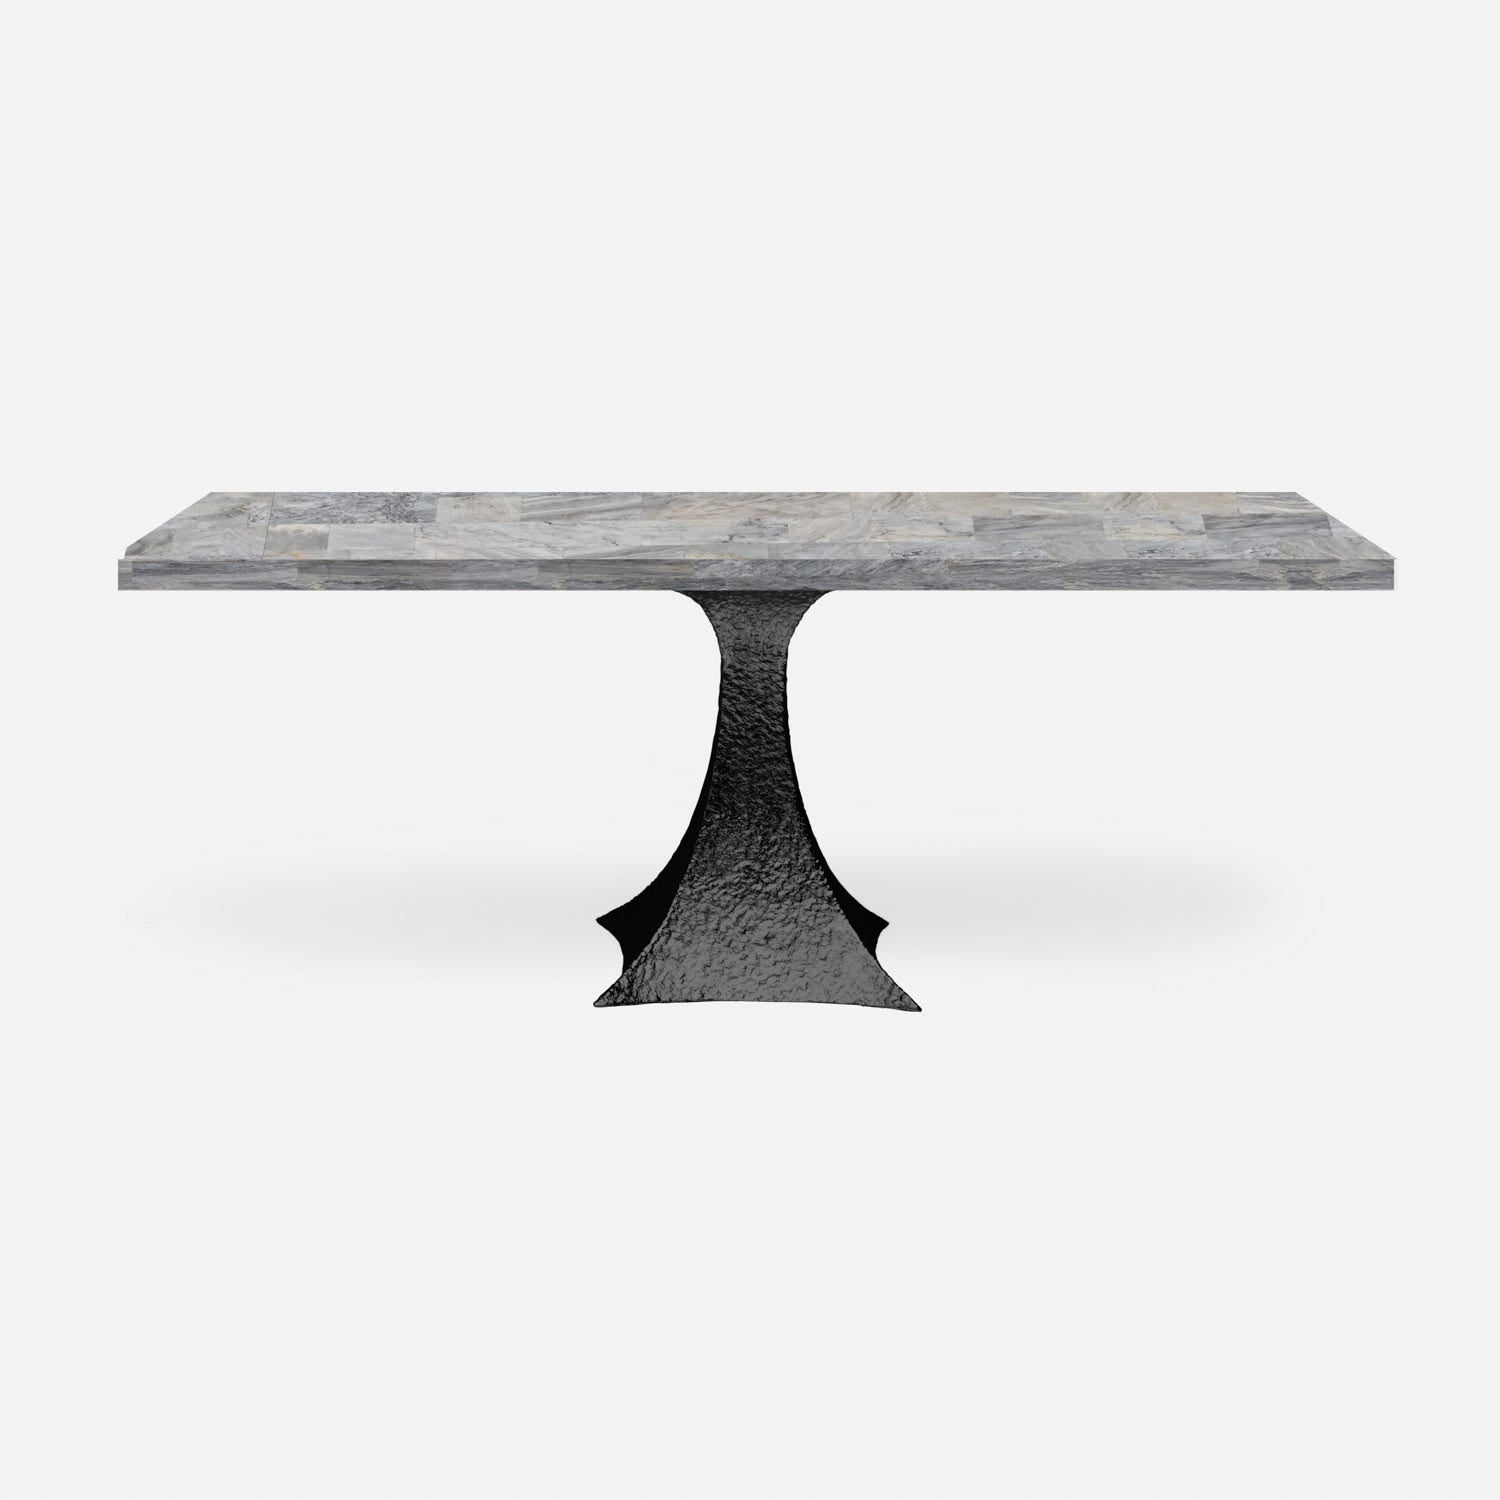 Made Goods Noor 72" x 40" x 30" Bumpy Black Iron Dinning Table With Rectangle Gray Romblon Stone Table Top